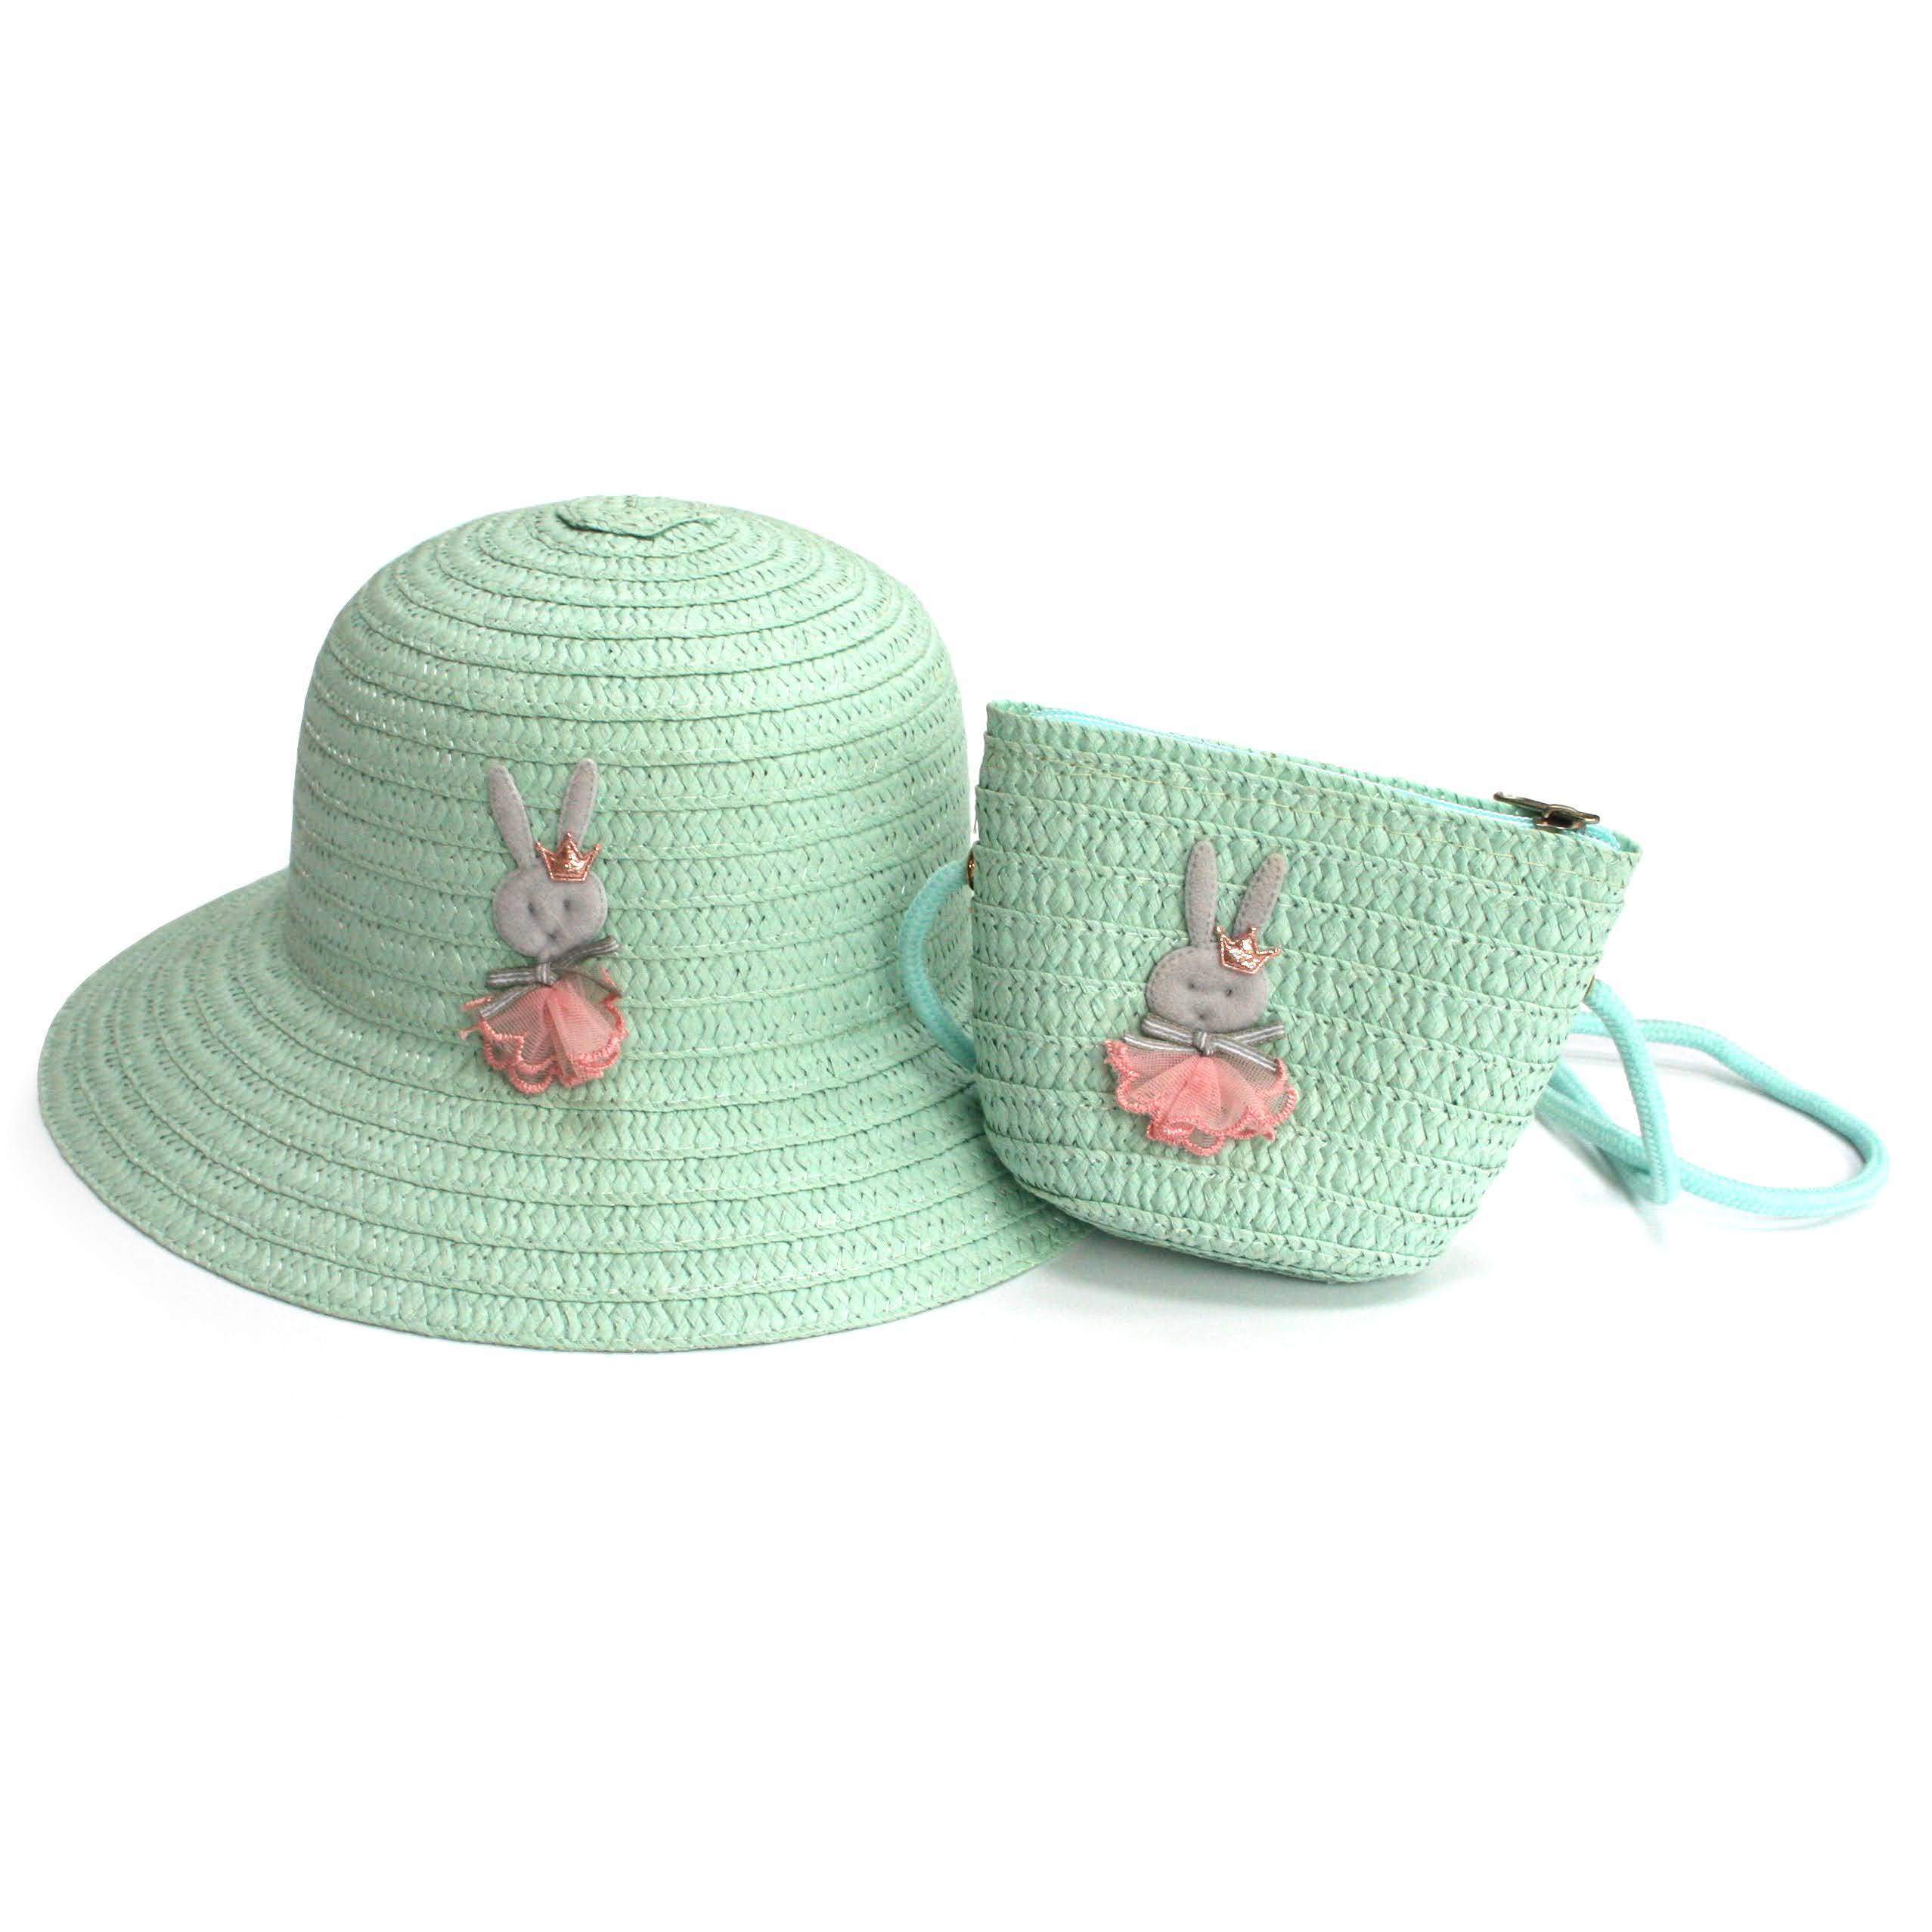 Childrens Rabbit Hat and Matching Bag with Strap - Green